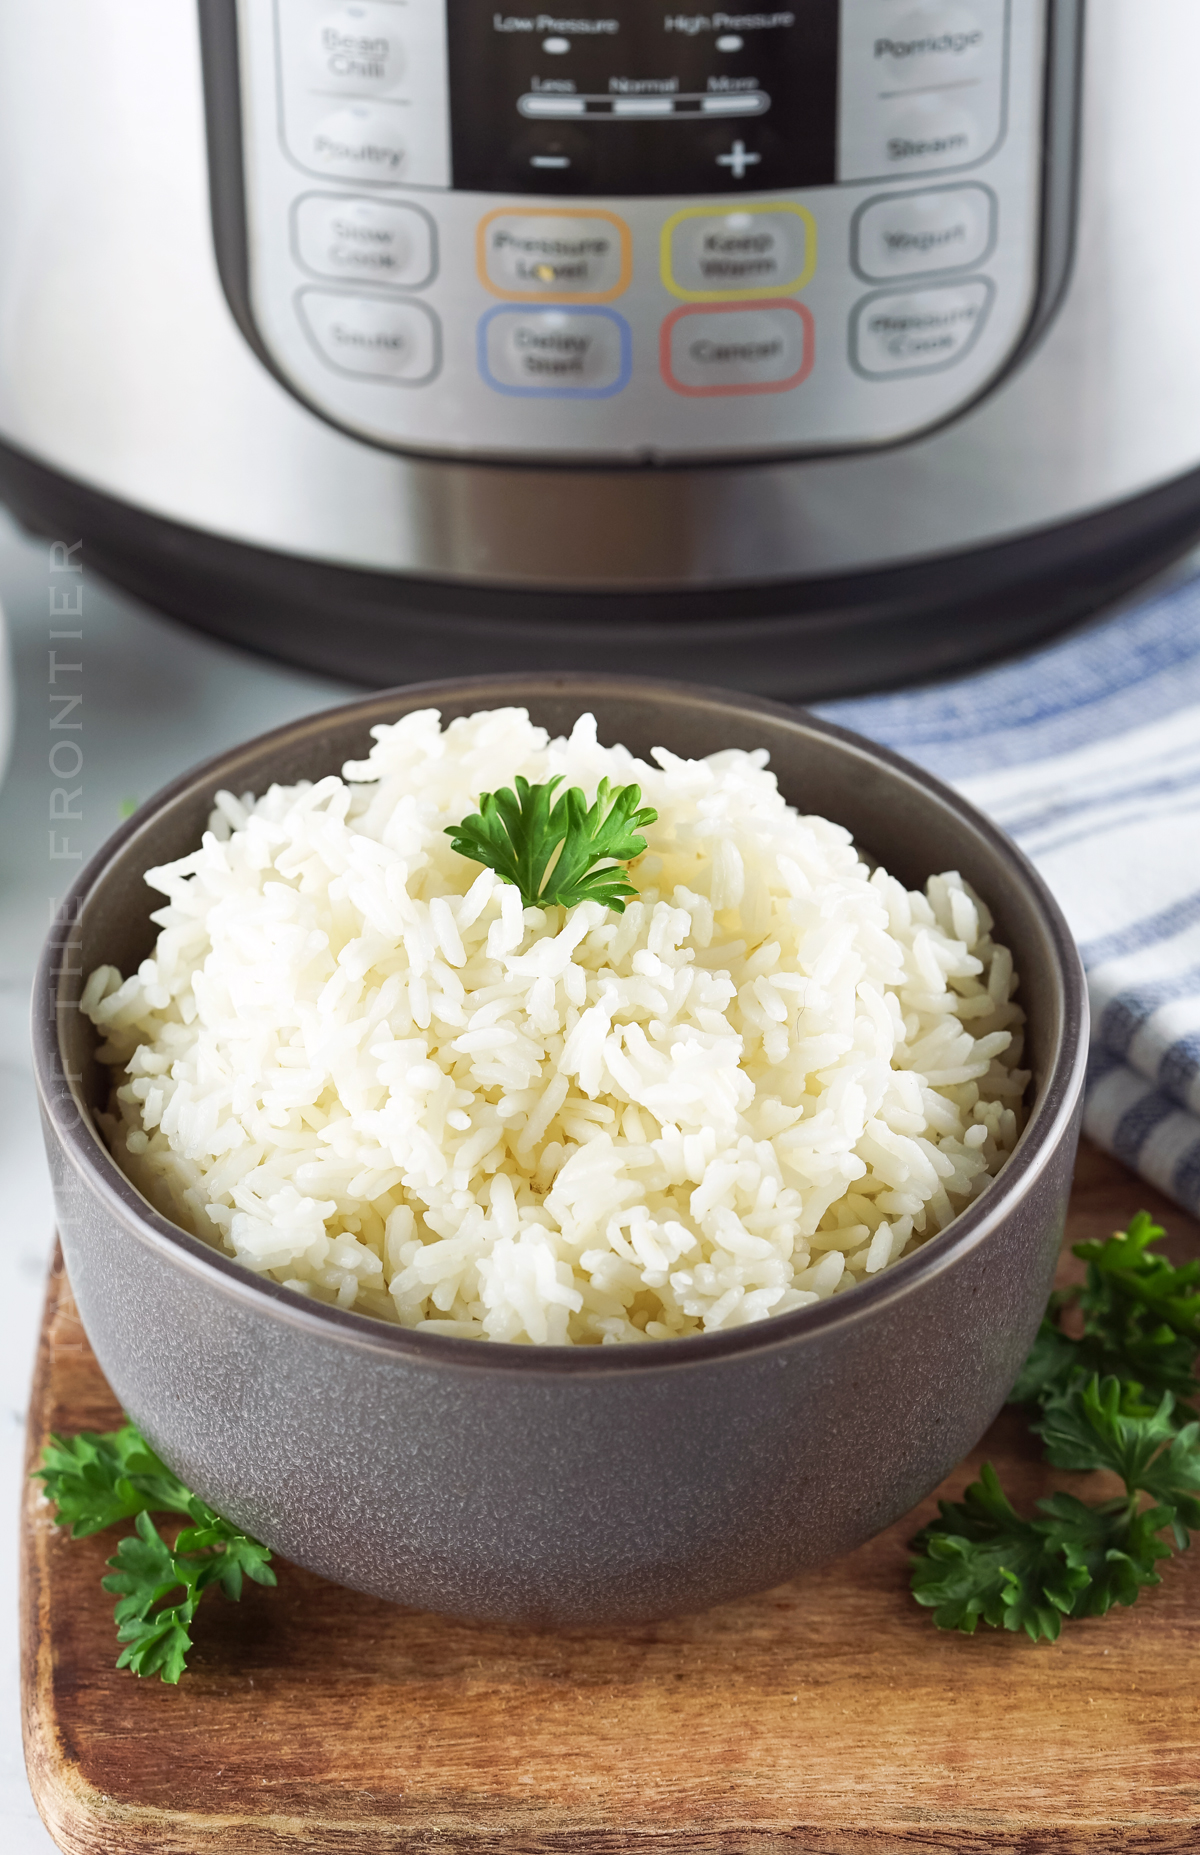 Instant Pot White Rice - Taste of the Frontier